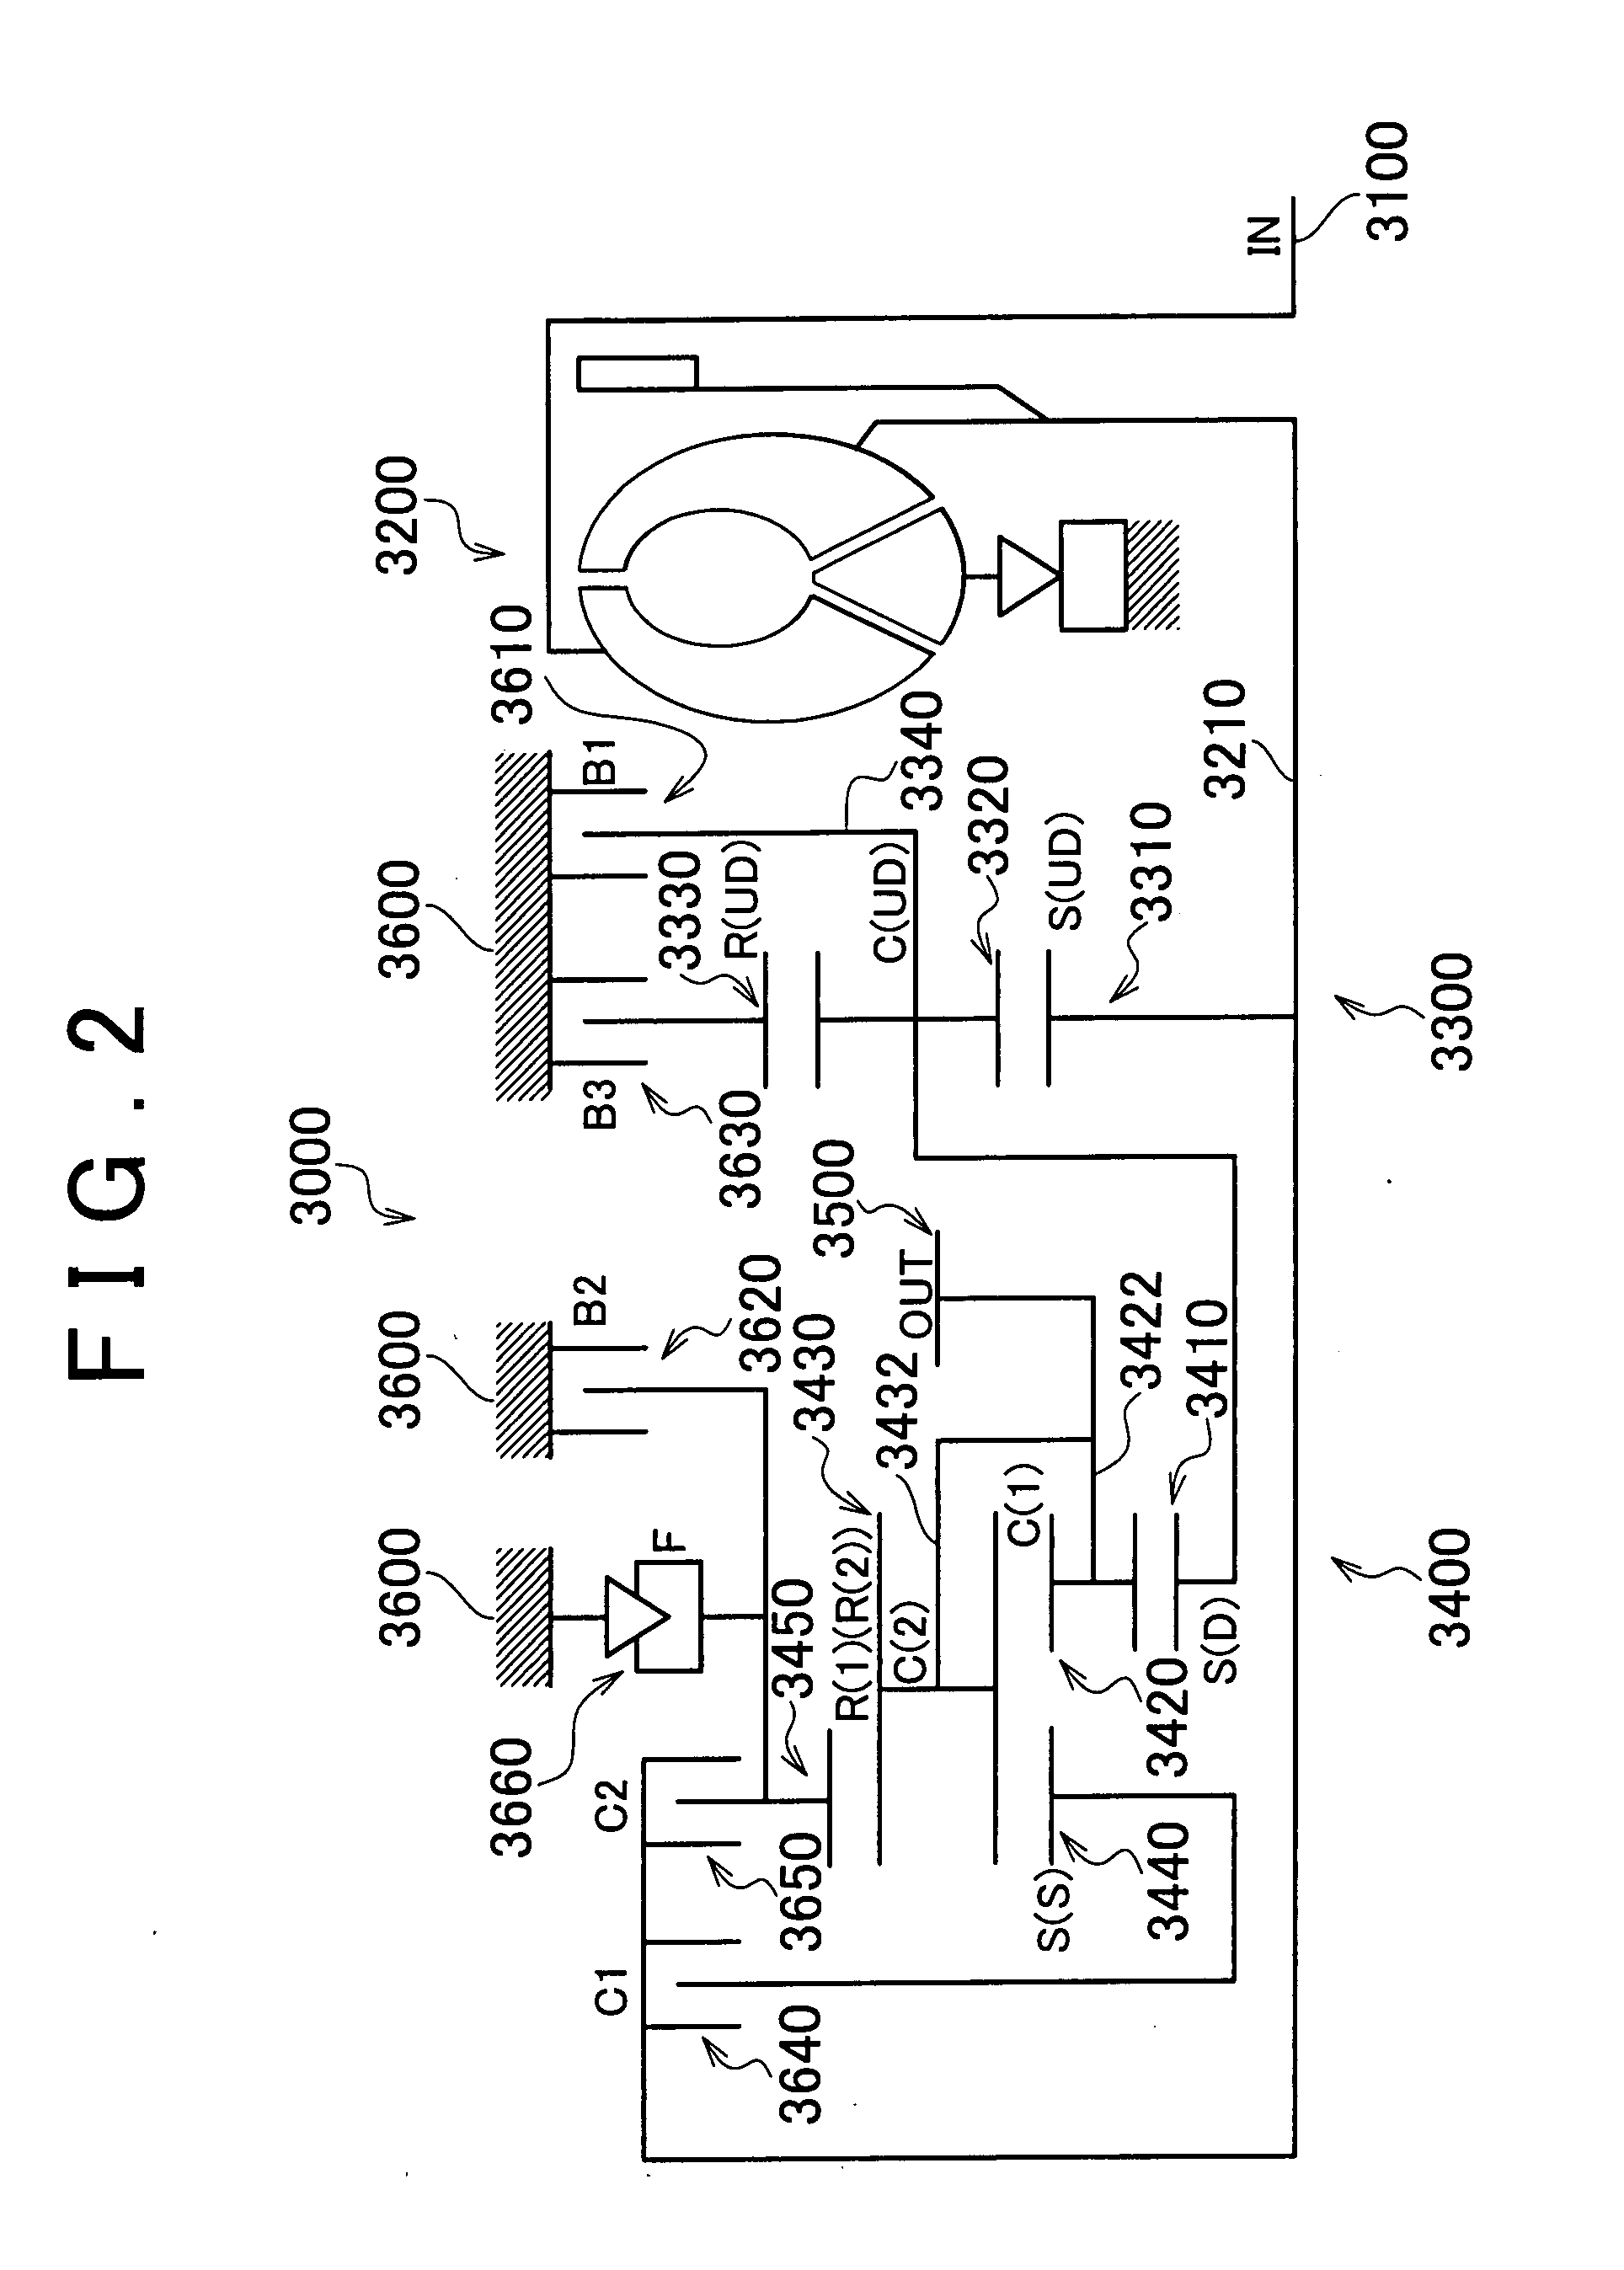 Vehicle controller and method of controlling a vehicle